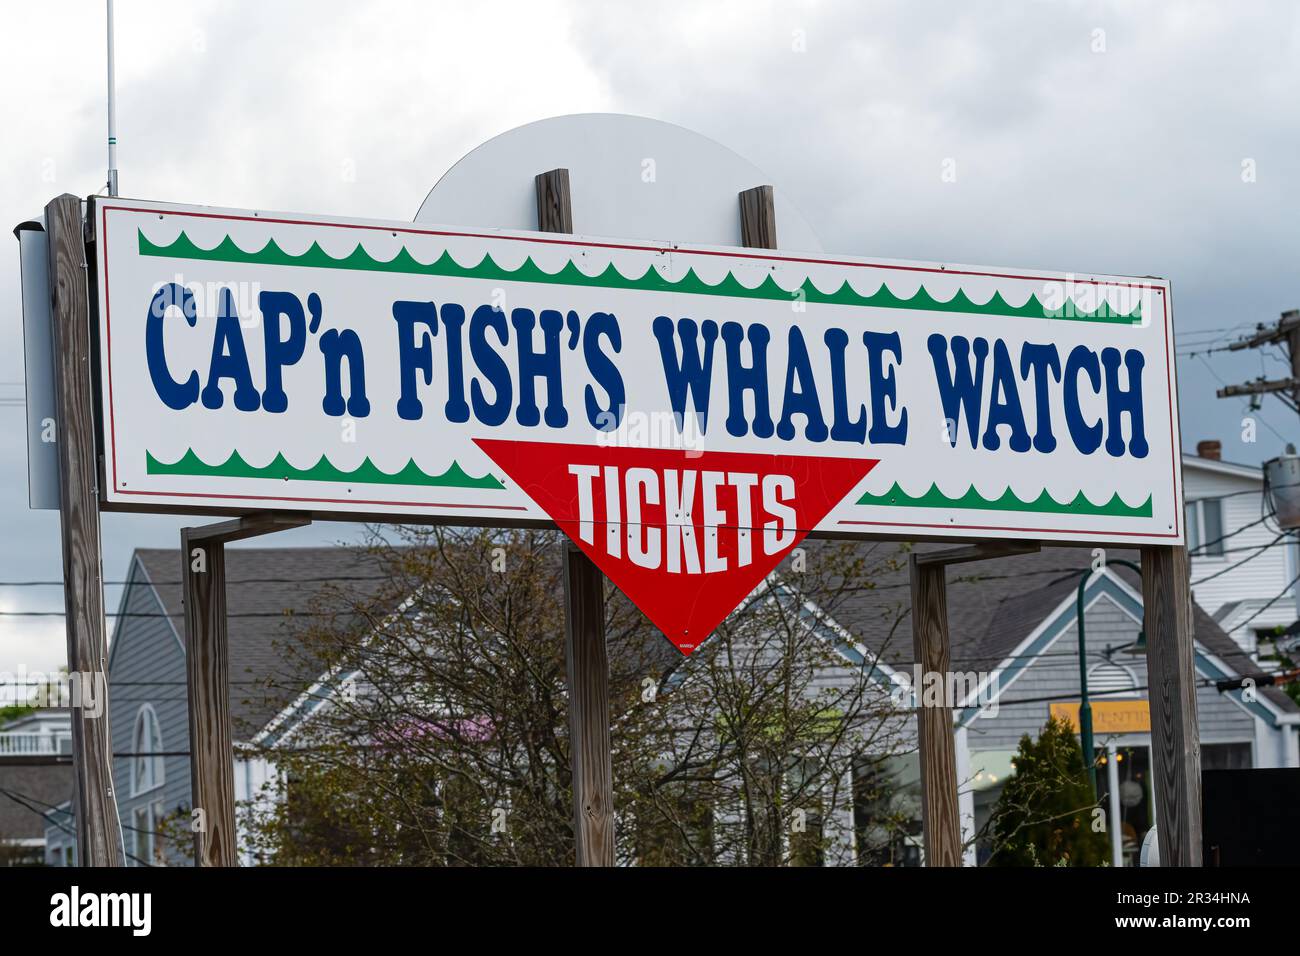 Sign for Cap'n Fish's whale watch boat trips in  Boothbay Harbor, Maine, USA. Stock Photo